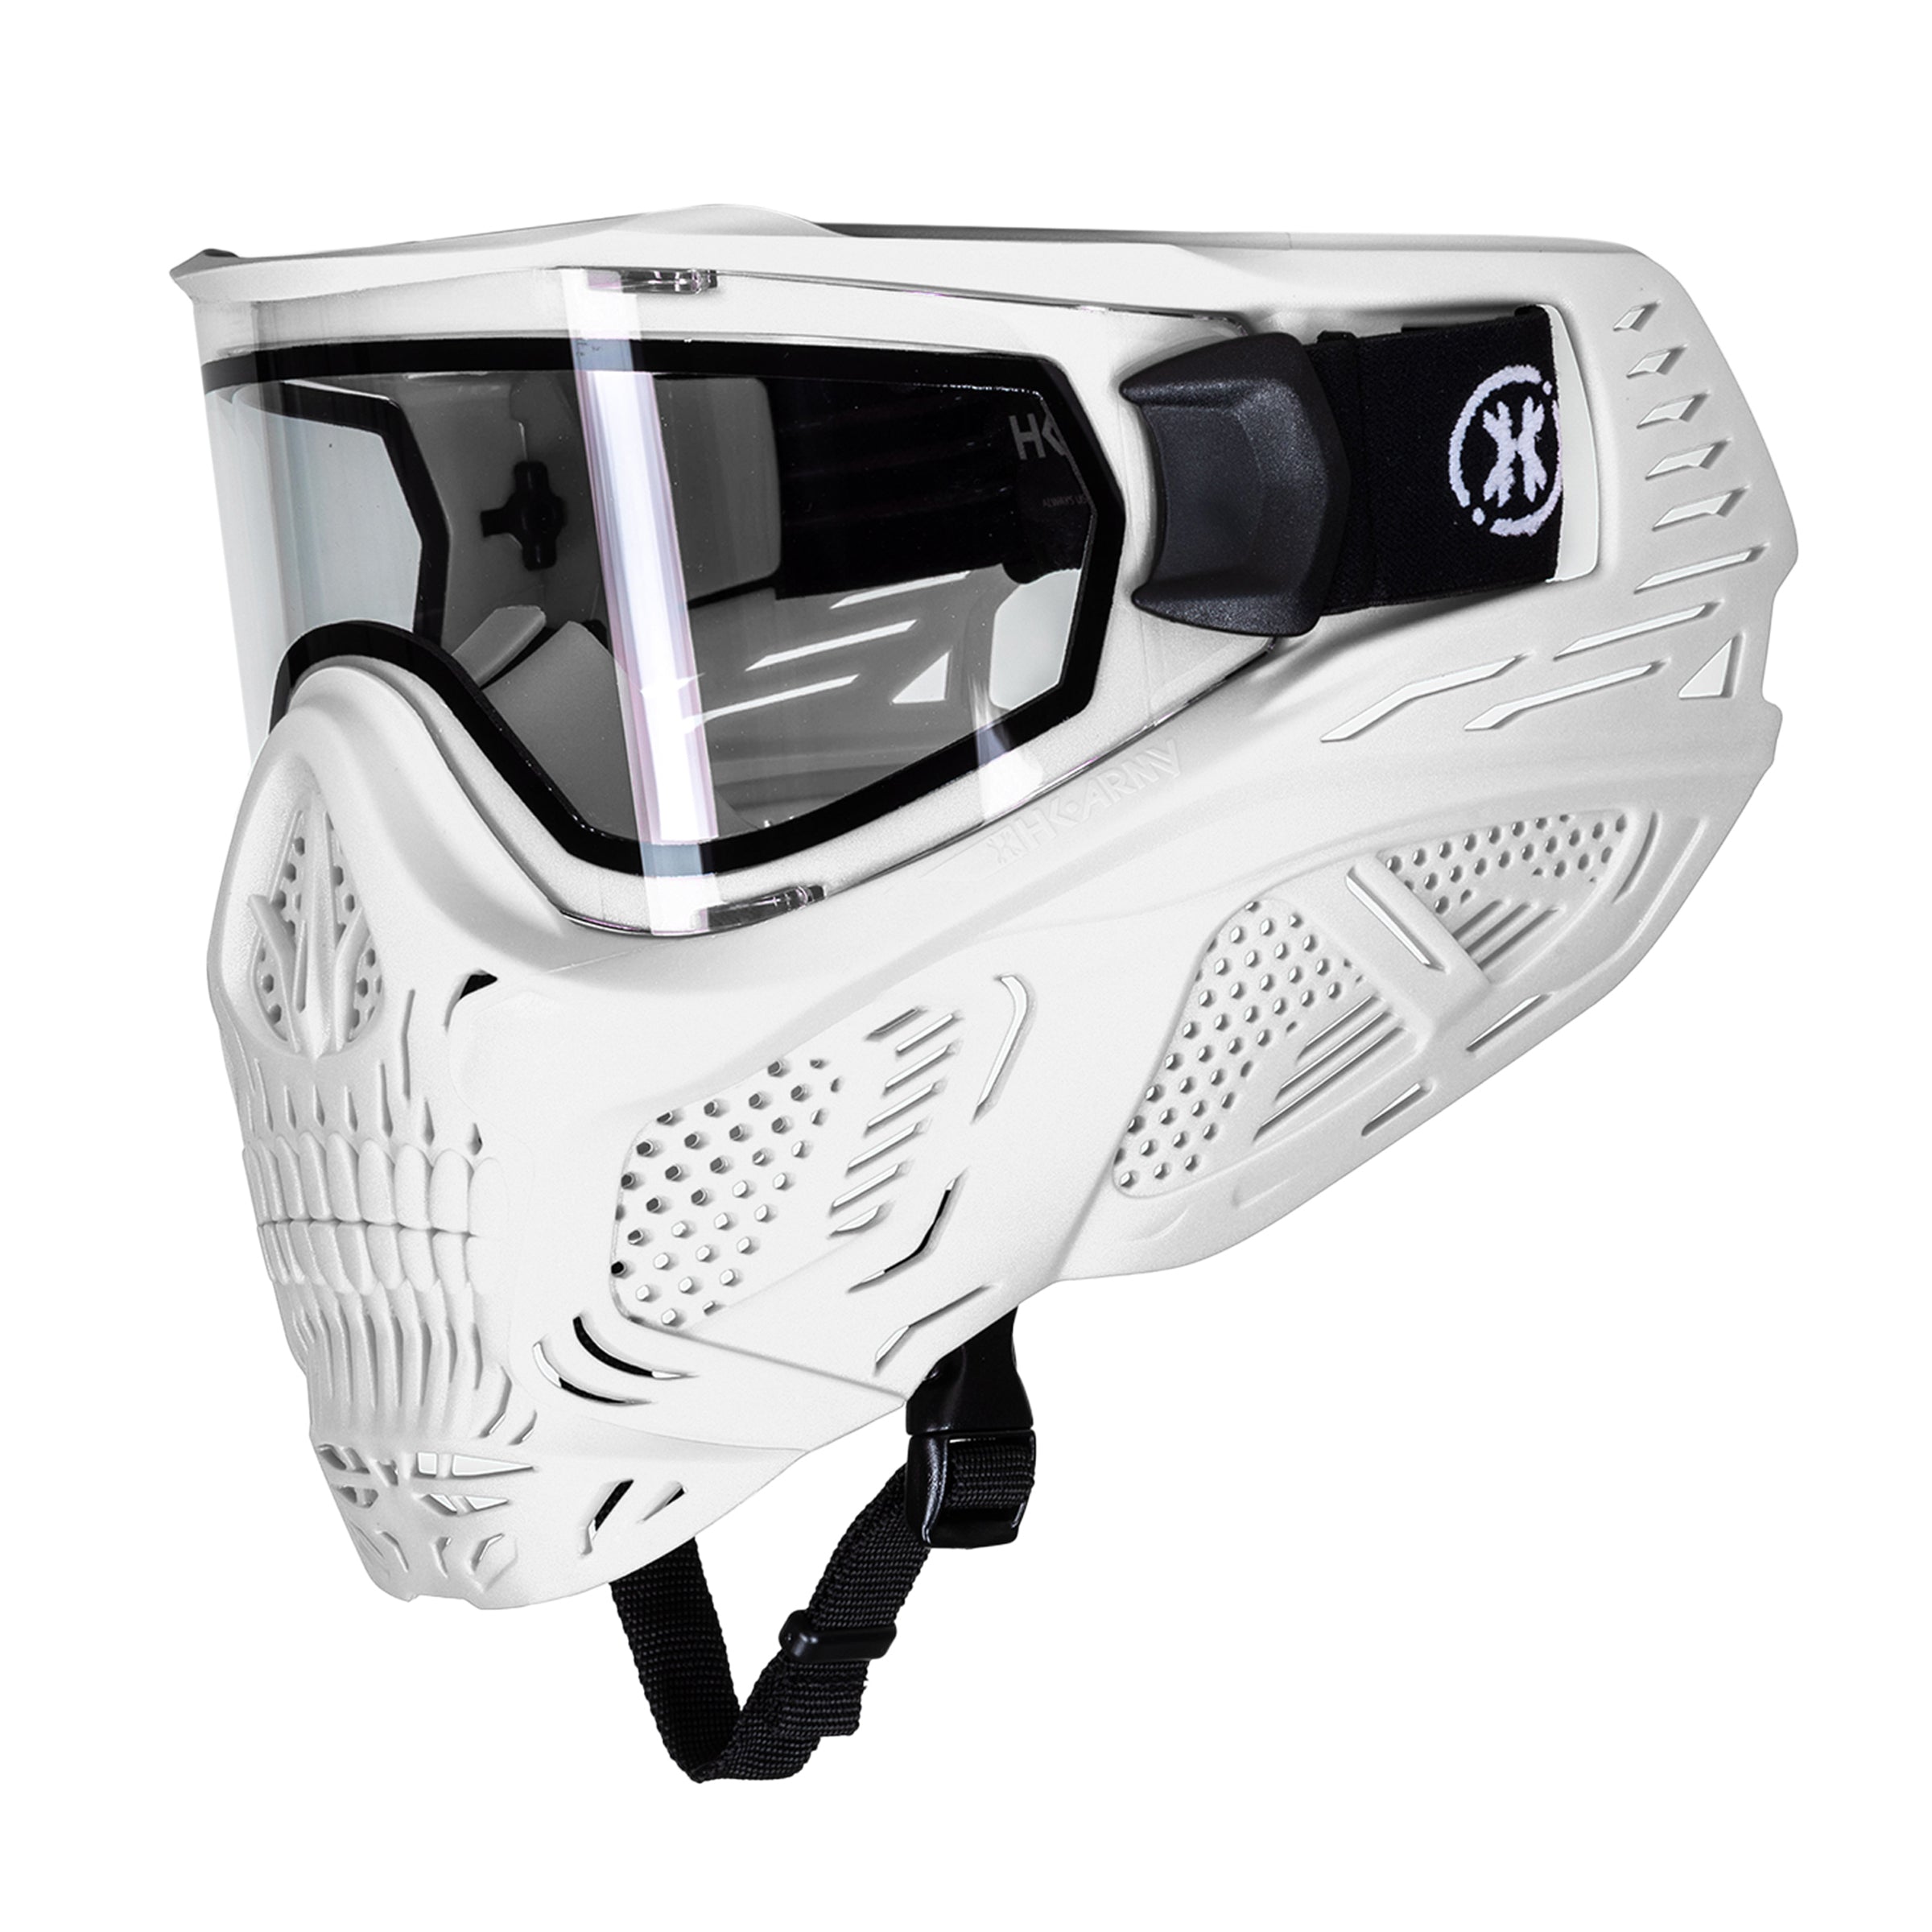 HSTL SKULL GOGGLE - Eminent Paintball And Airsoft